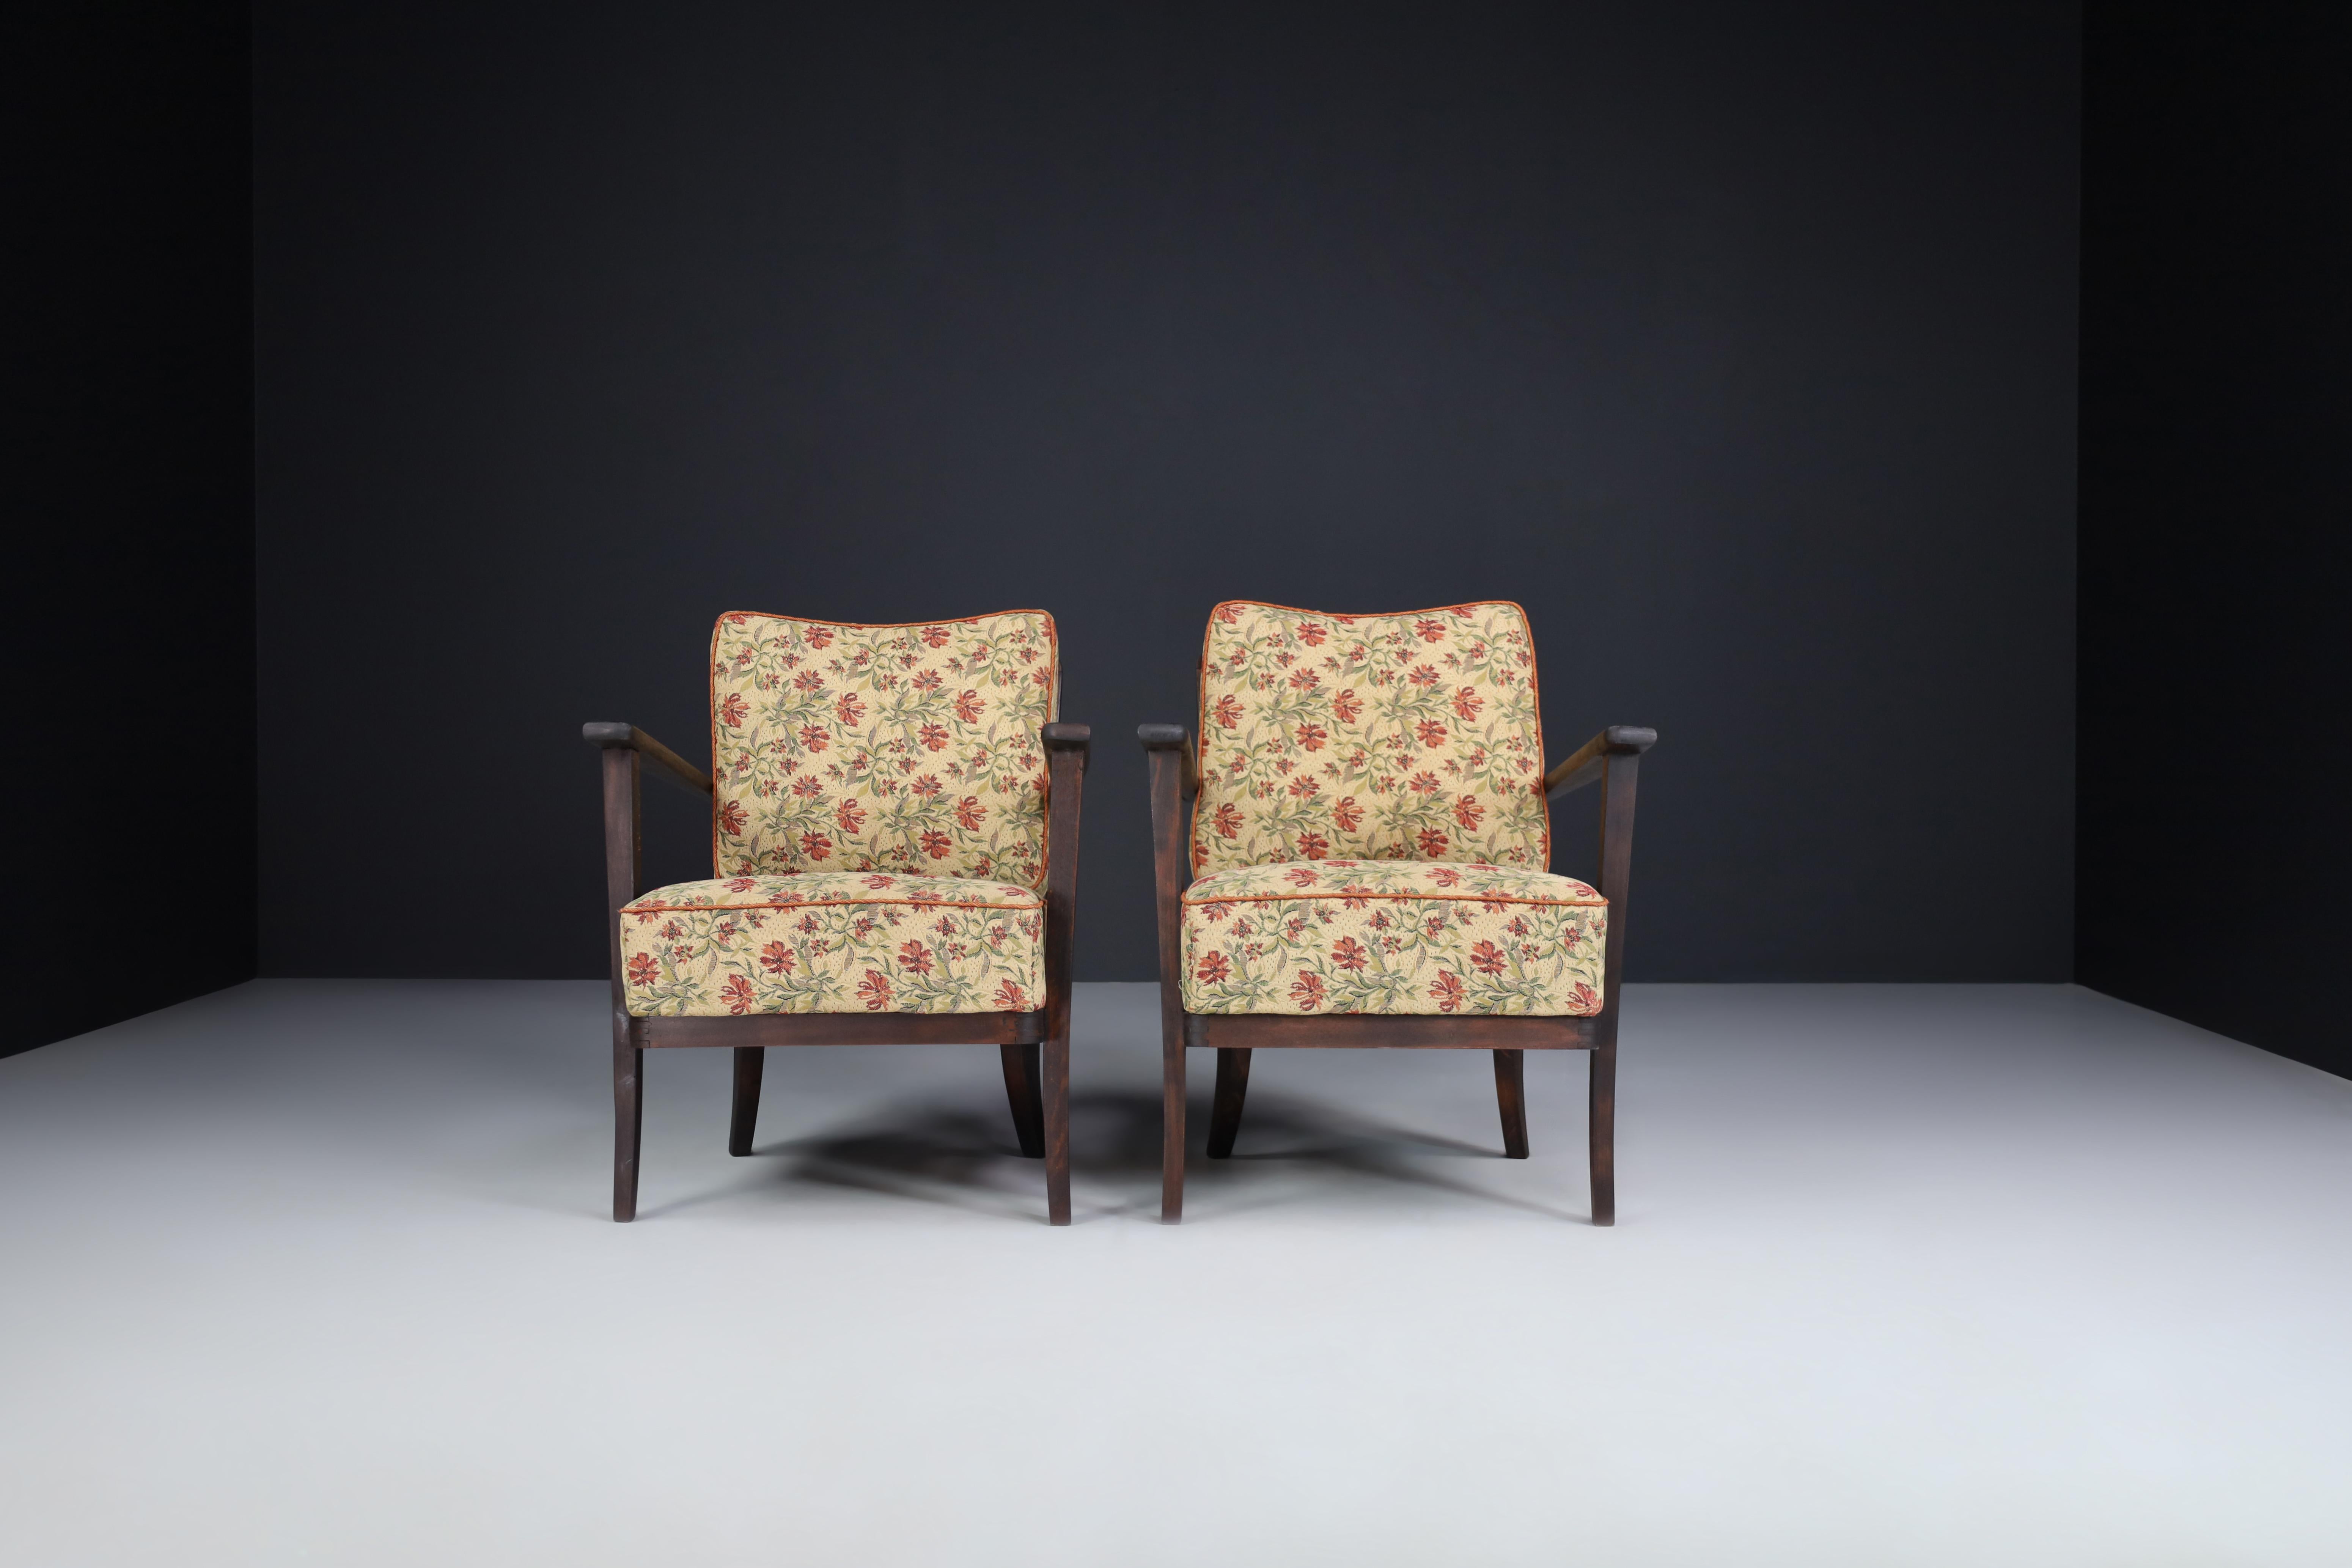 Armchairs with floral Upholstery, France 1950s. 

Midcentury armchairs were manufactured and designed in France 1950s. These armchairs have the original upholstery floral fabric and a lovely elegant wooden frame. It is in excellent vintage